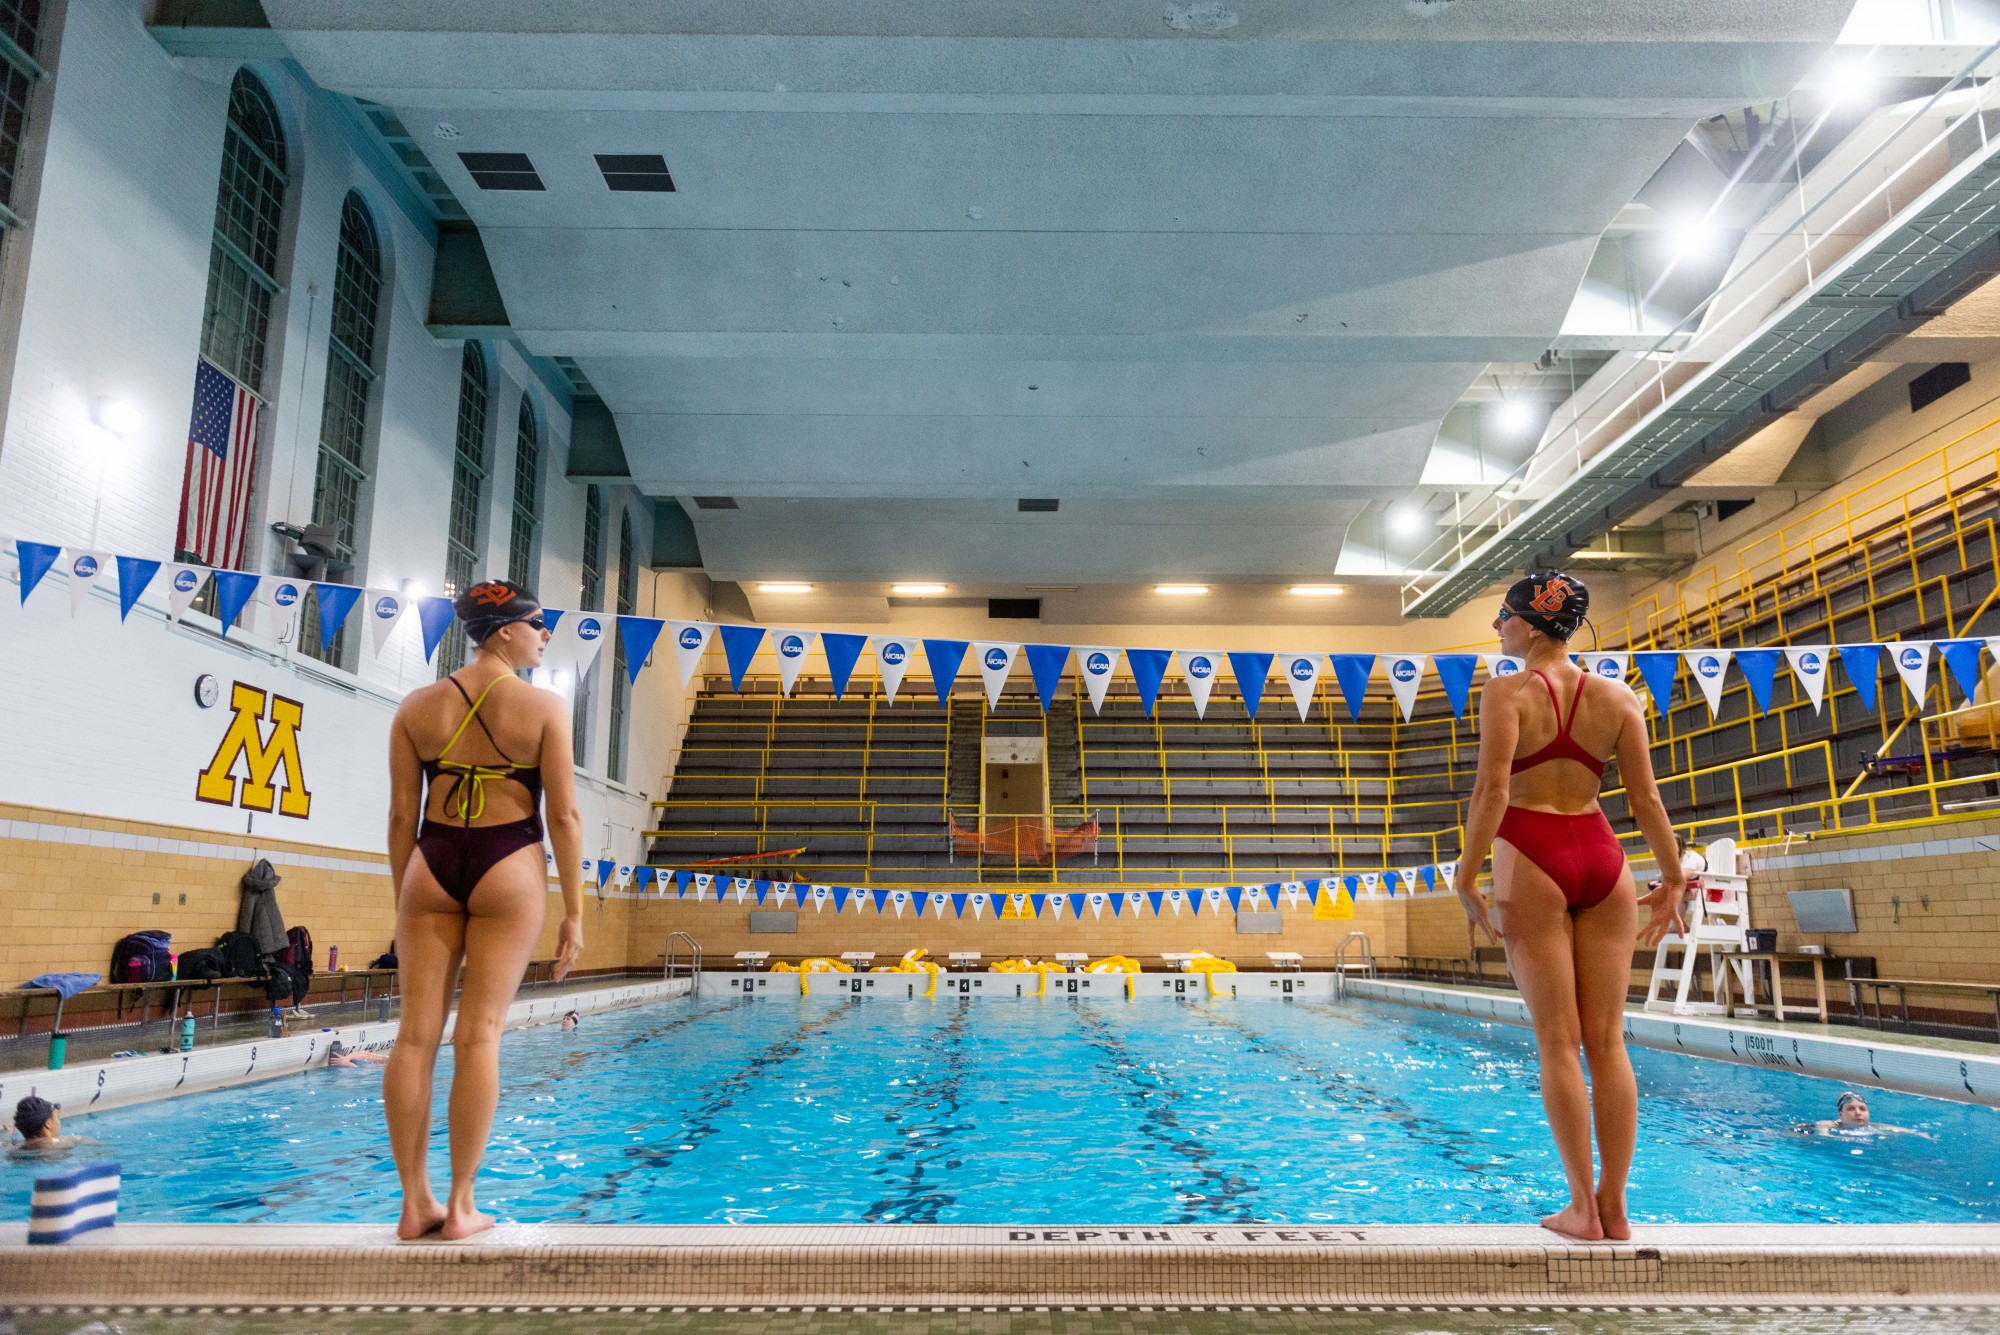 Members of the Universitys Synchronized Swimming Club participate in a practice session in Cooke Hall on Wednesday, March 4.